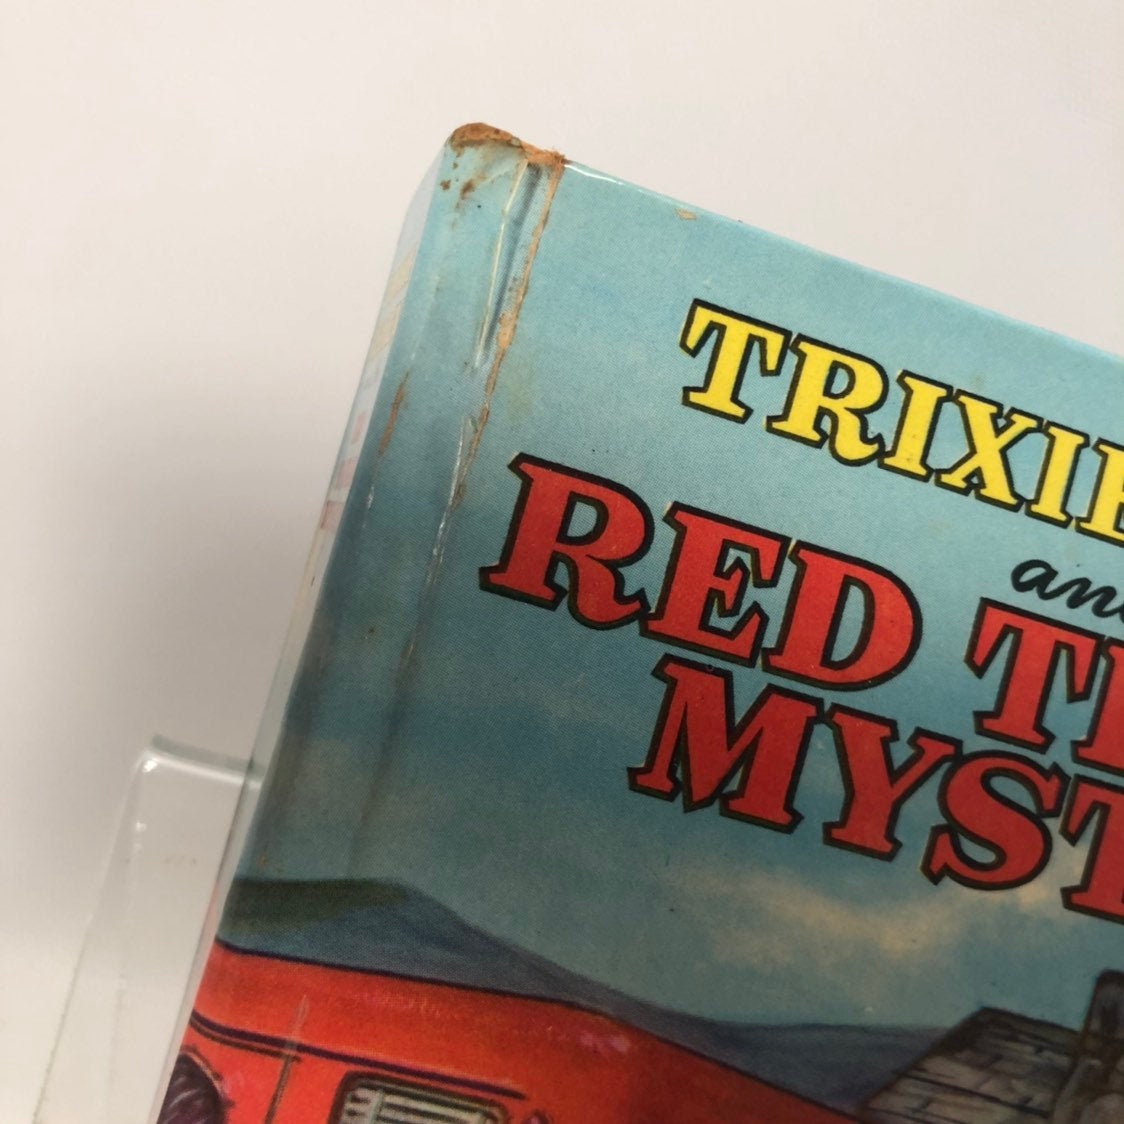 Vintage Trixie Belden and the Red Trailer Mystery by Julie Cambell 1954 Book Two in the SeriesVintage Book